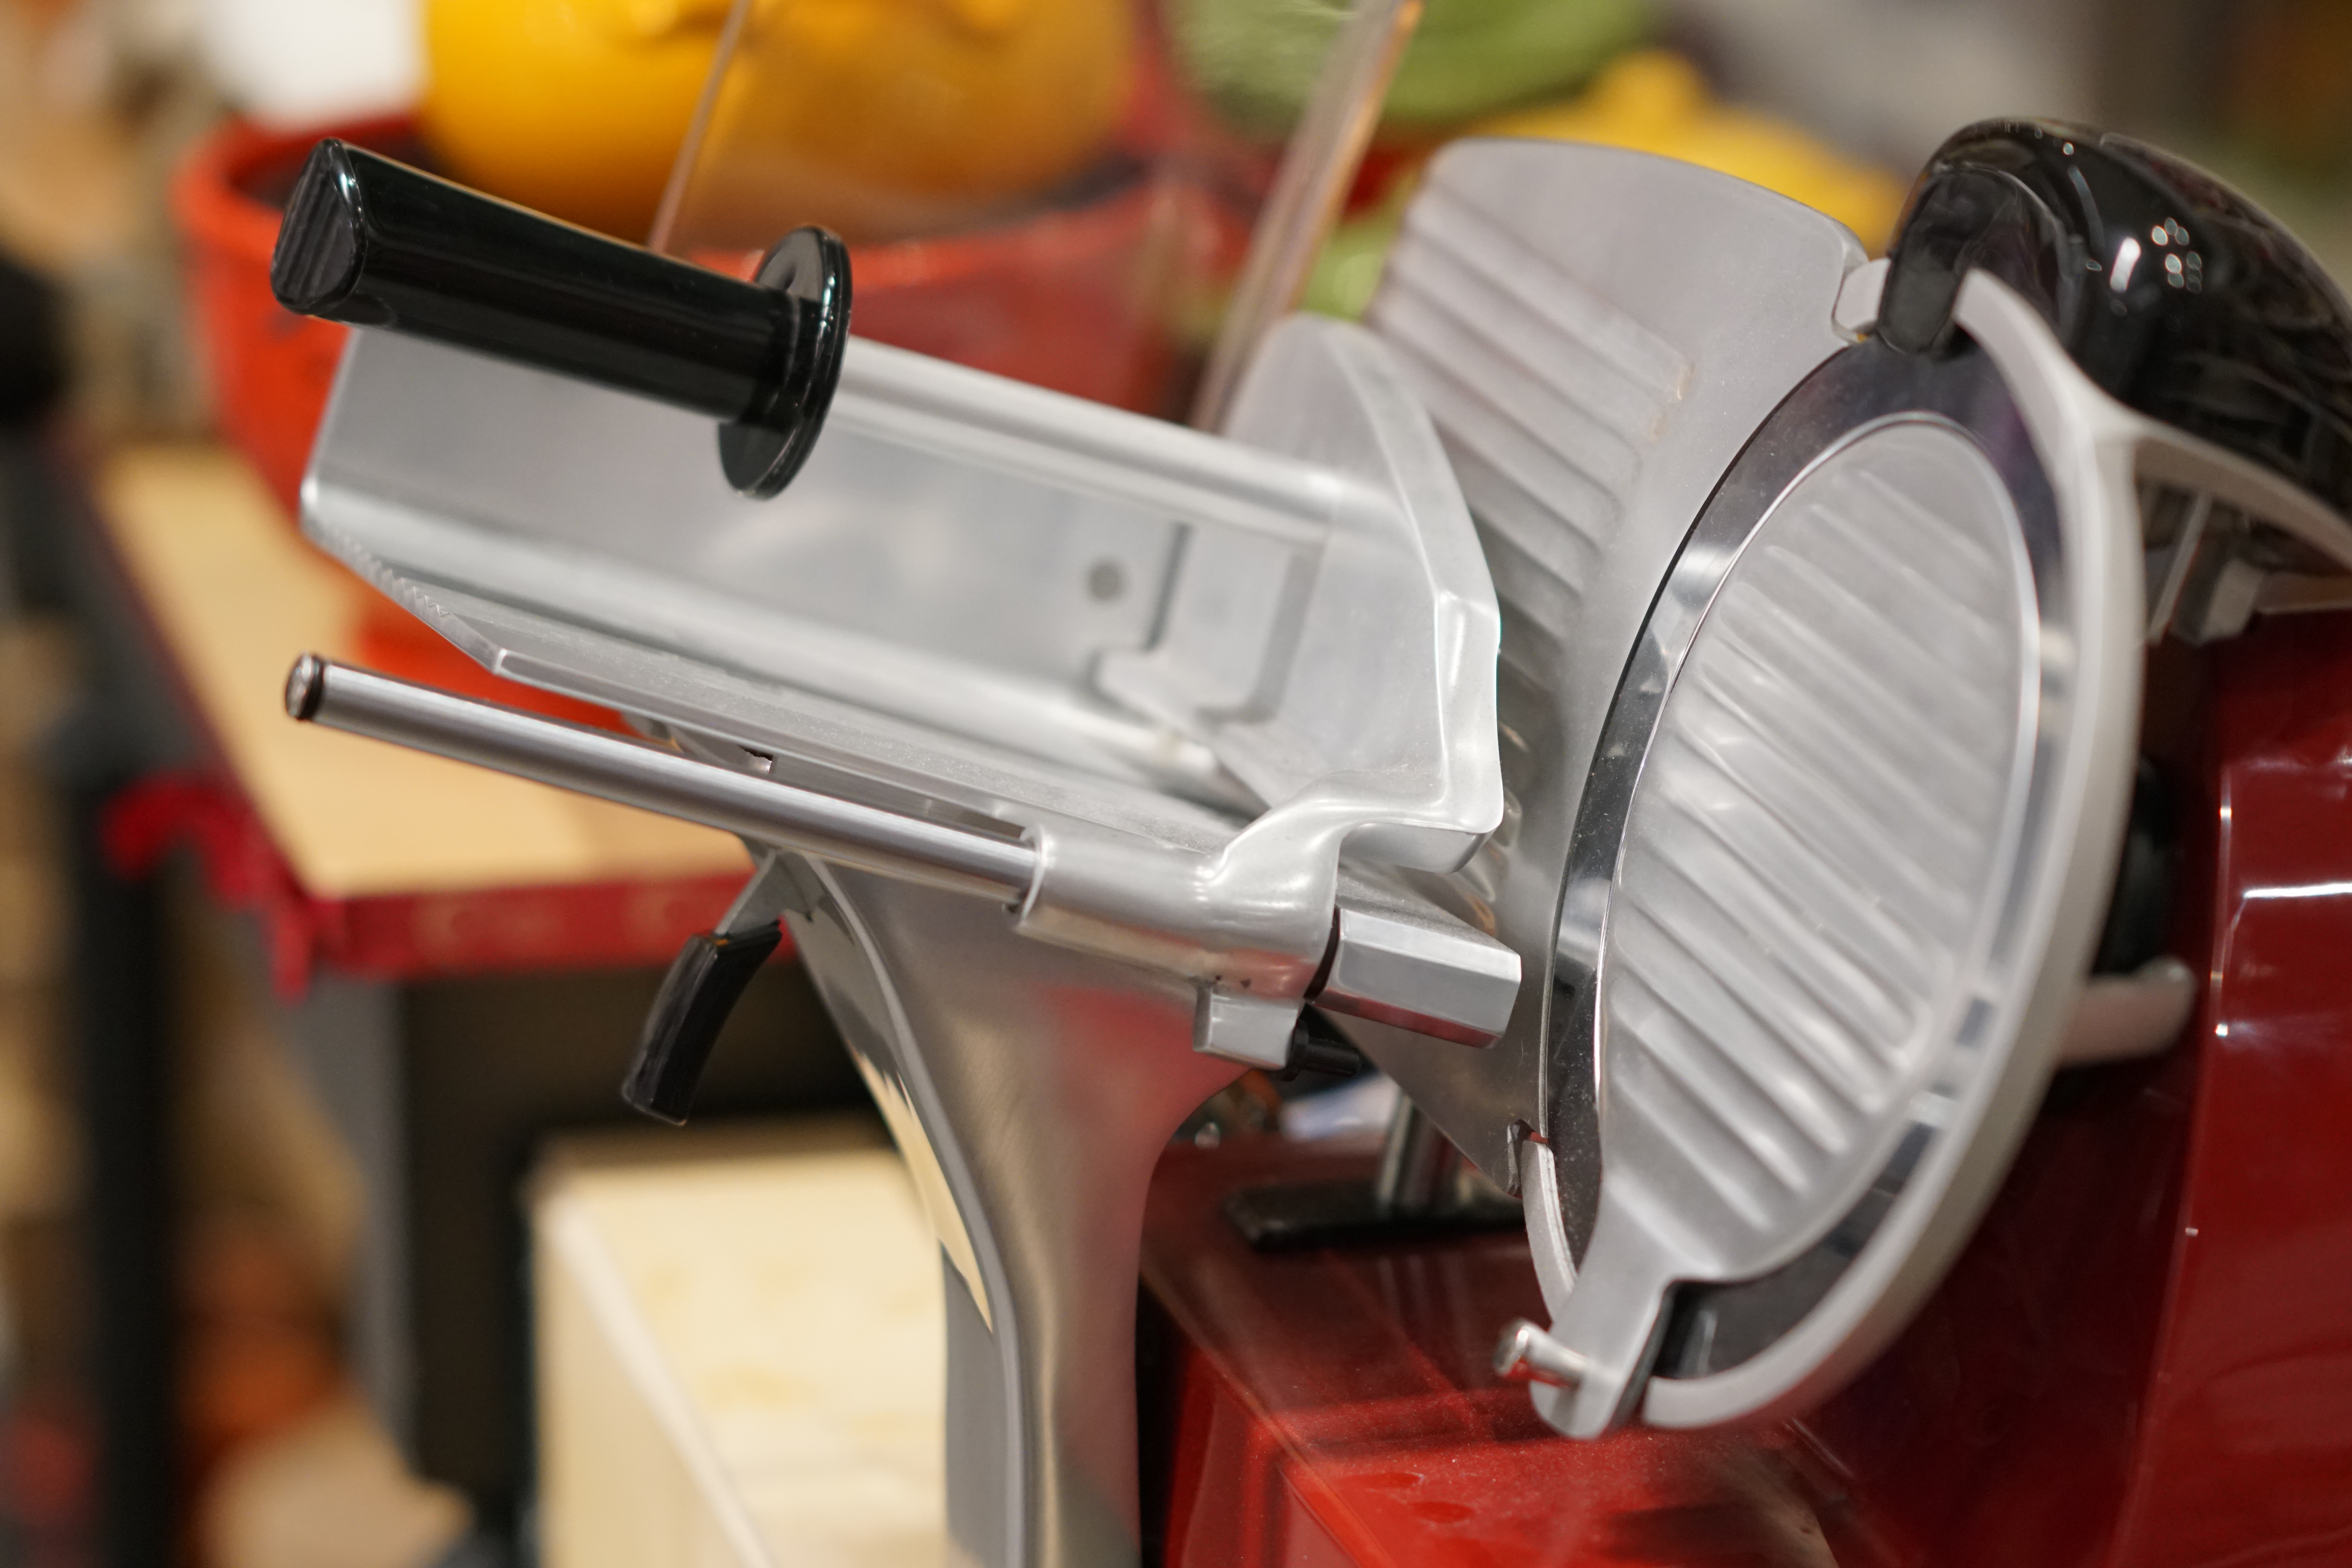 Best Meat Slicers on , According to Reviews